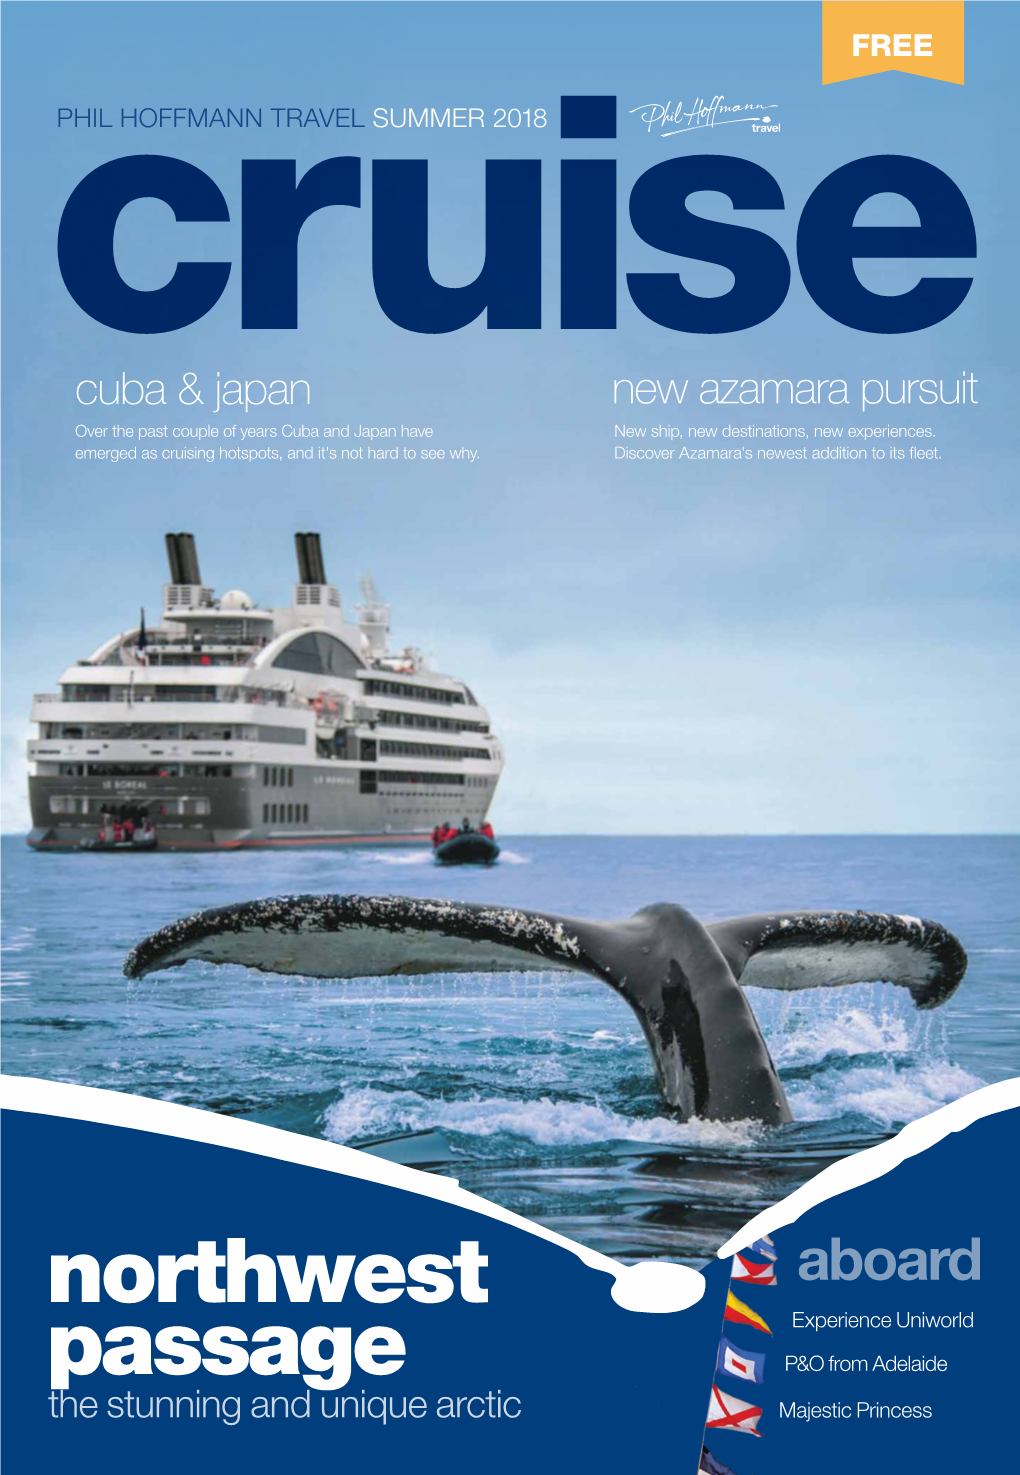 Aboard Experience Uniworld Passage P&O from Adelaide the Stunning and Unique Arctic Majestic Princess 2017/18 Summer Issue Welcome to Cruising